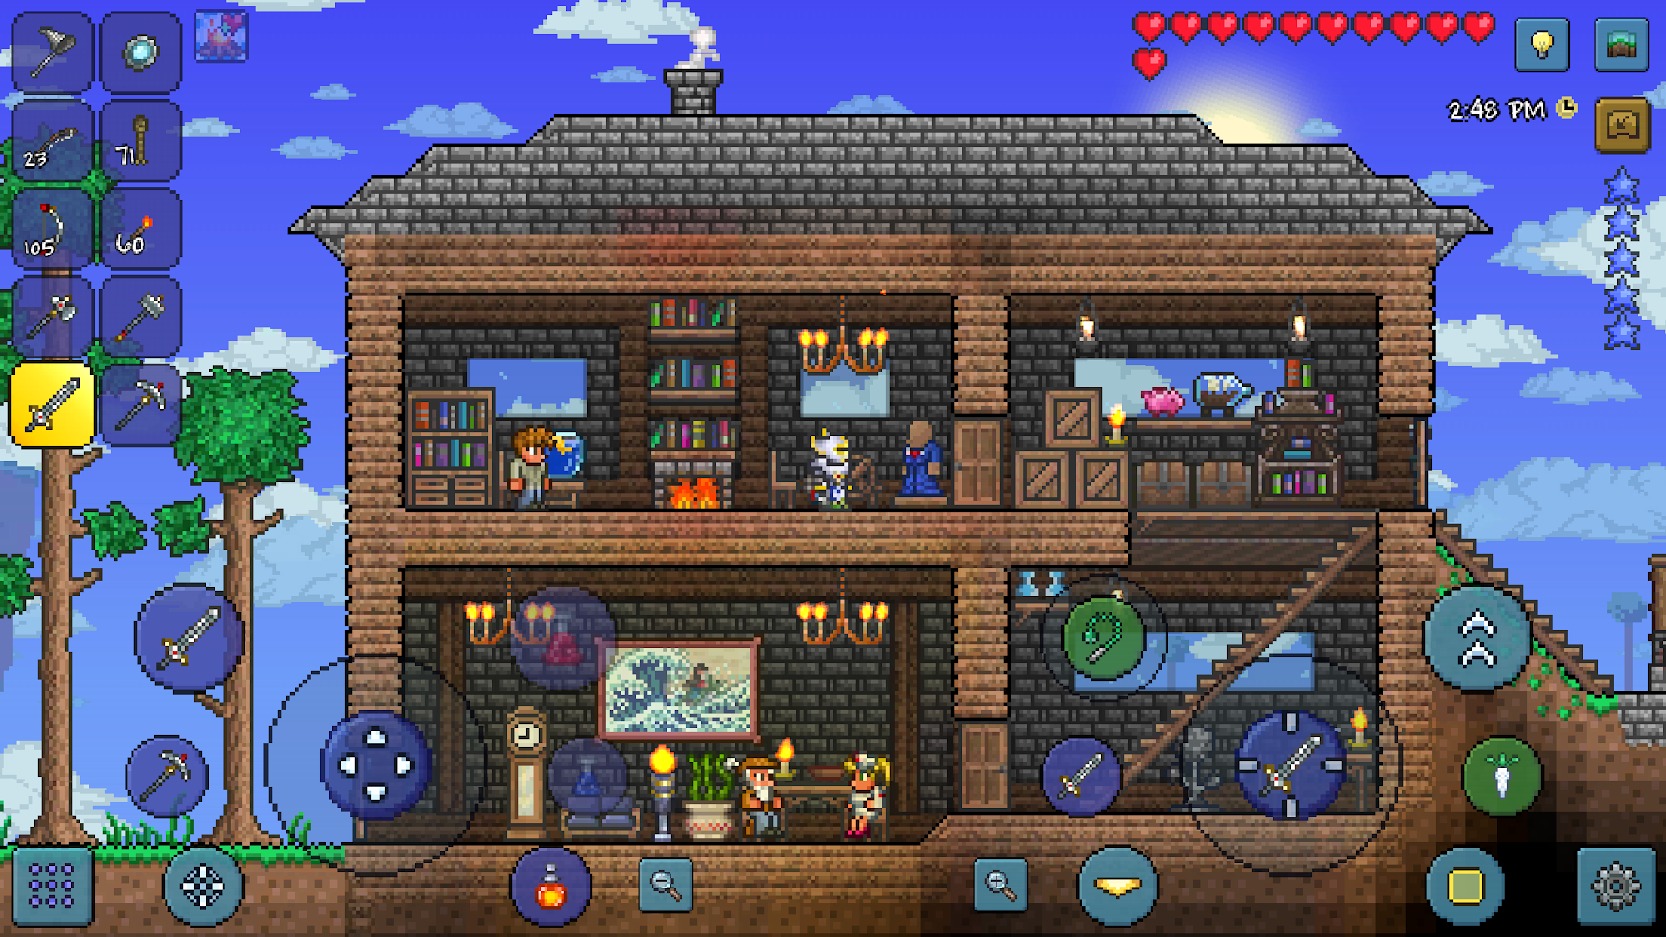 Is Terraria Cross Platform In 2022? (PC, Xbox, PS, Switch, Mobile)